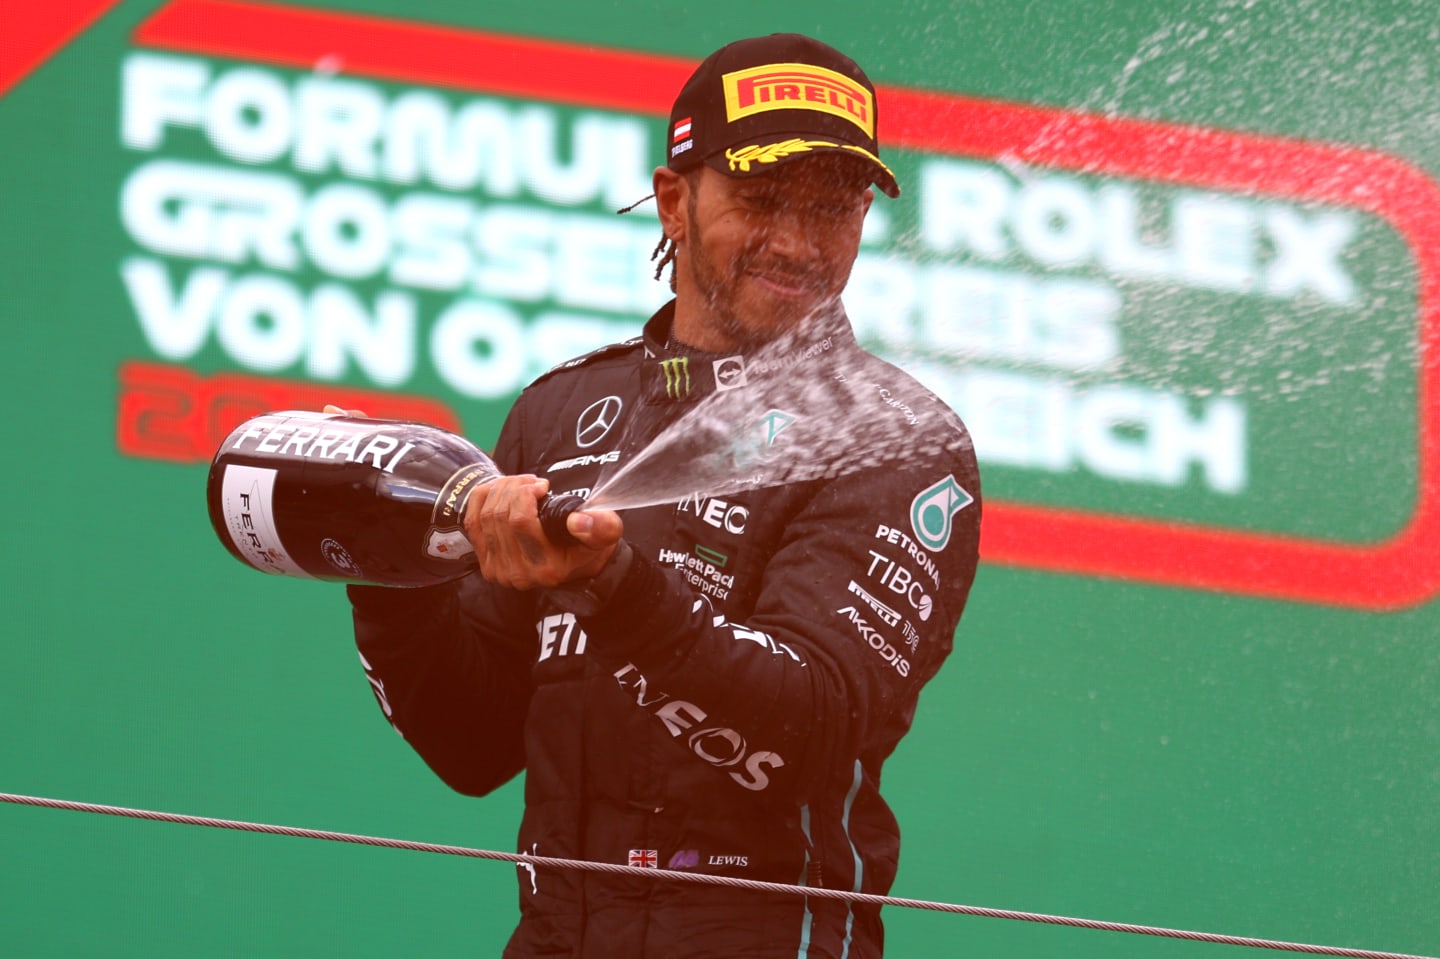 SPIELBERG, AUSTRIA - JULY 10: Third placed Lewis Hamilton of Great Britain and Mercedes celebrates on the podium during the F1 Grand Prix of Austria at Red Bull Ring on July 10, 2022 in Spielberg, Austria. (Photo by Bryn Lennon/Getty Images)